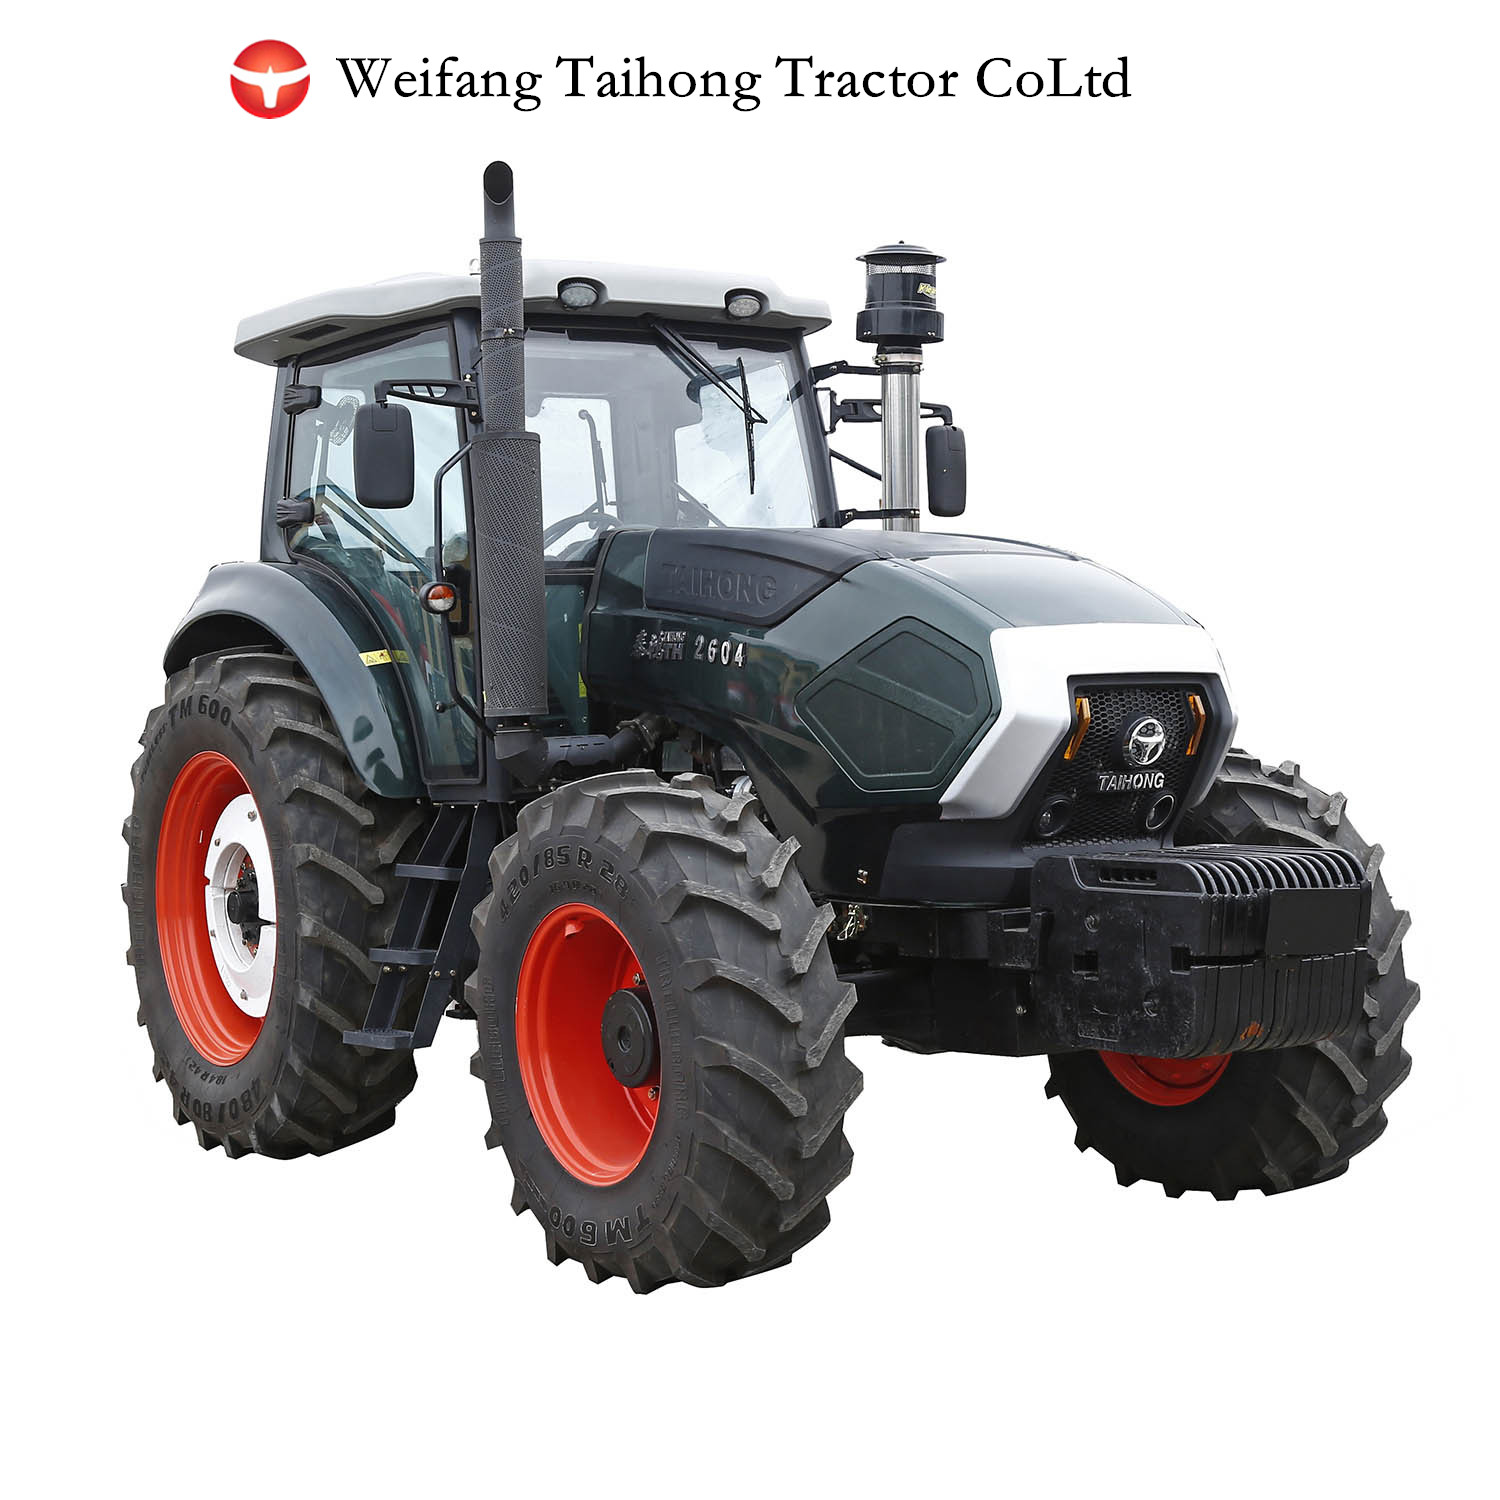 TH2604 tractor